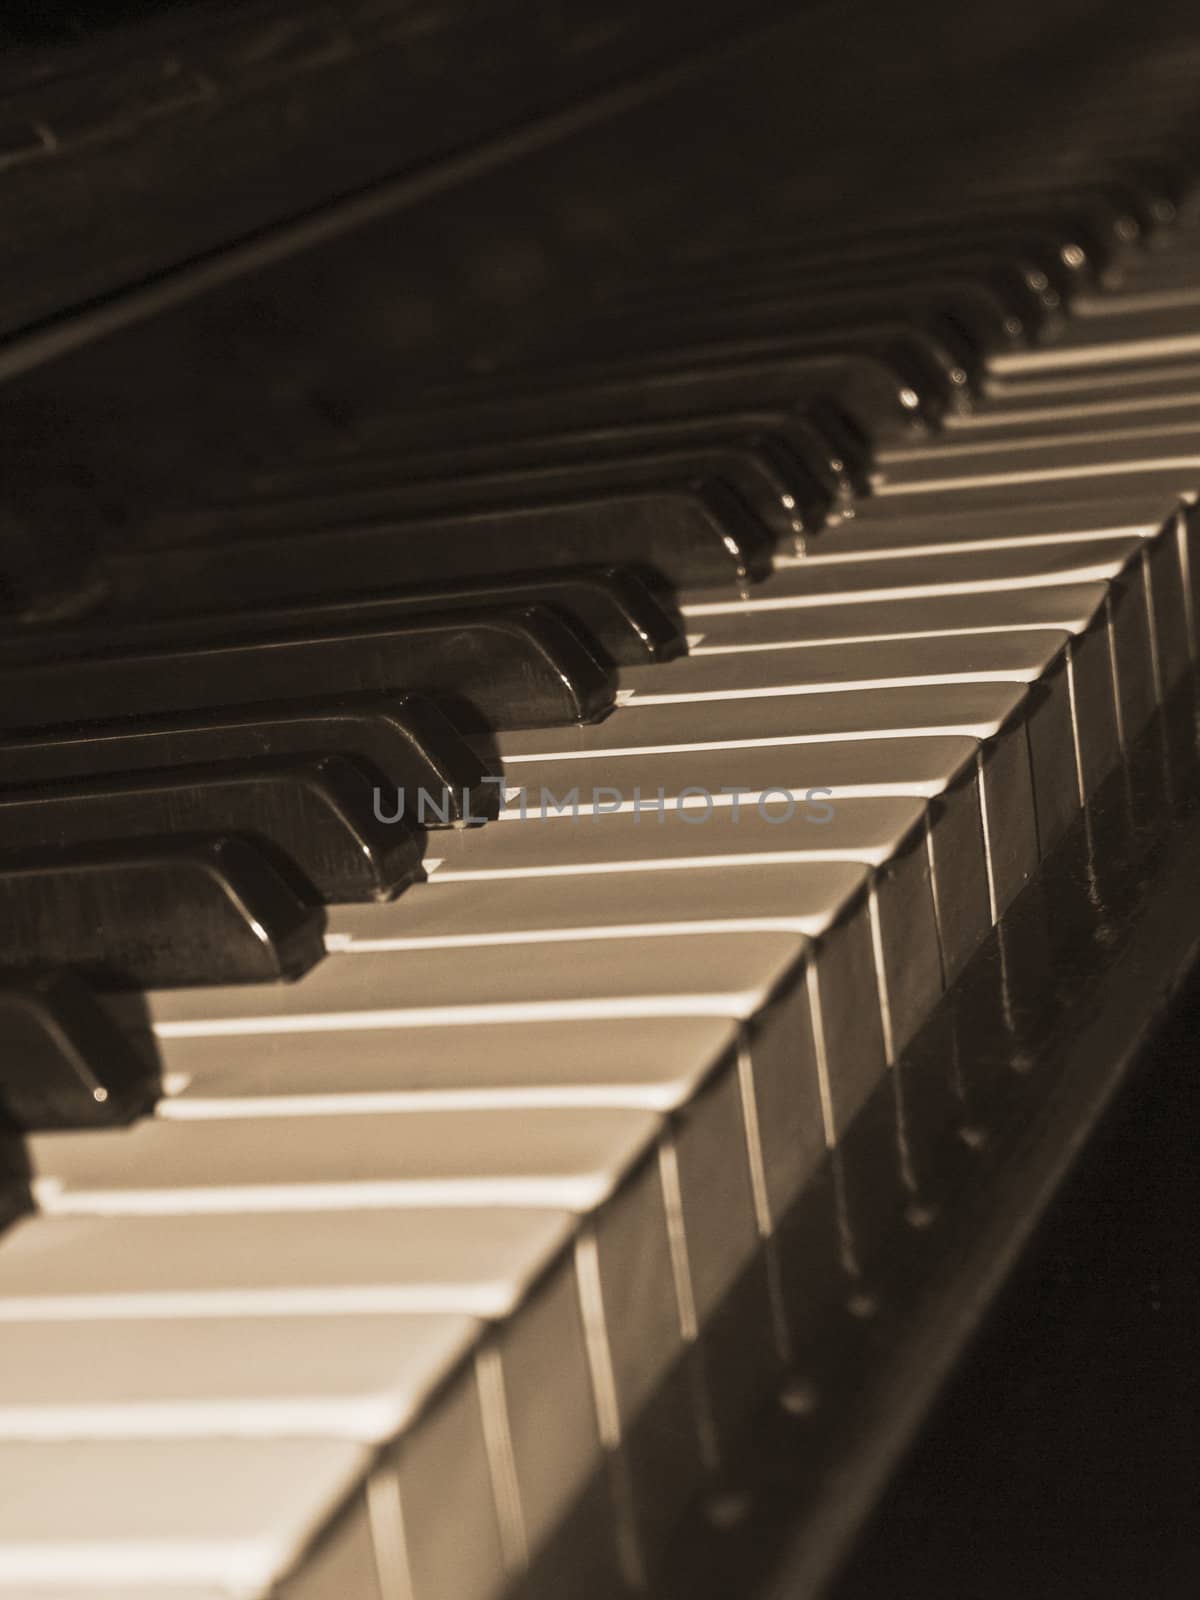 The image of keys of the old piano